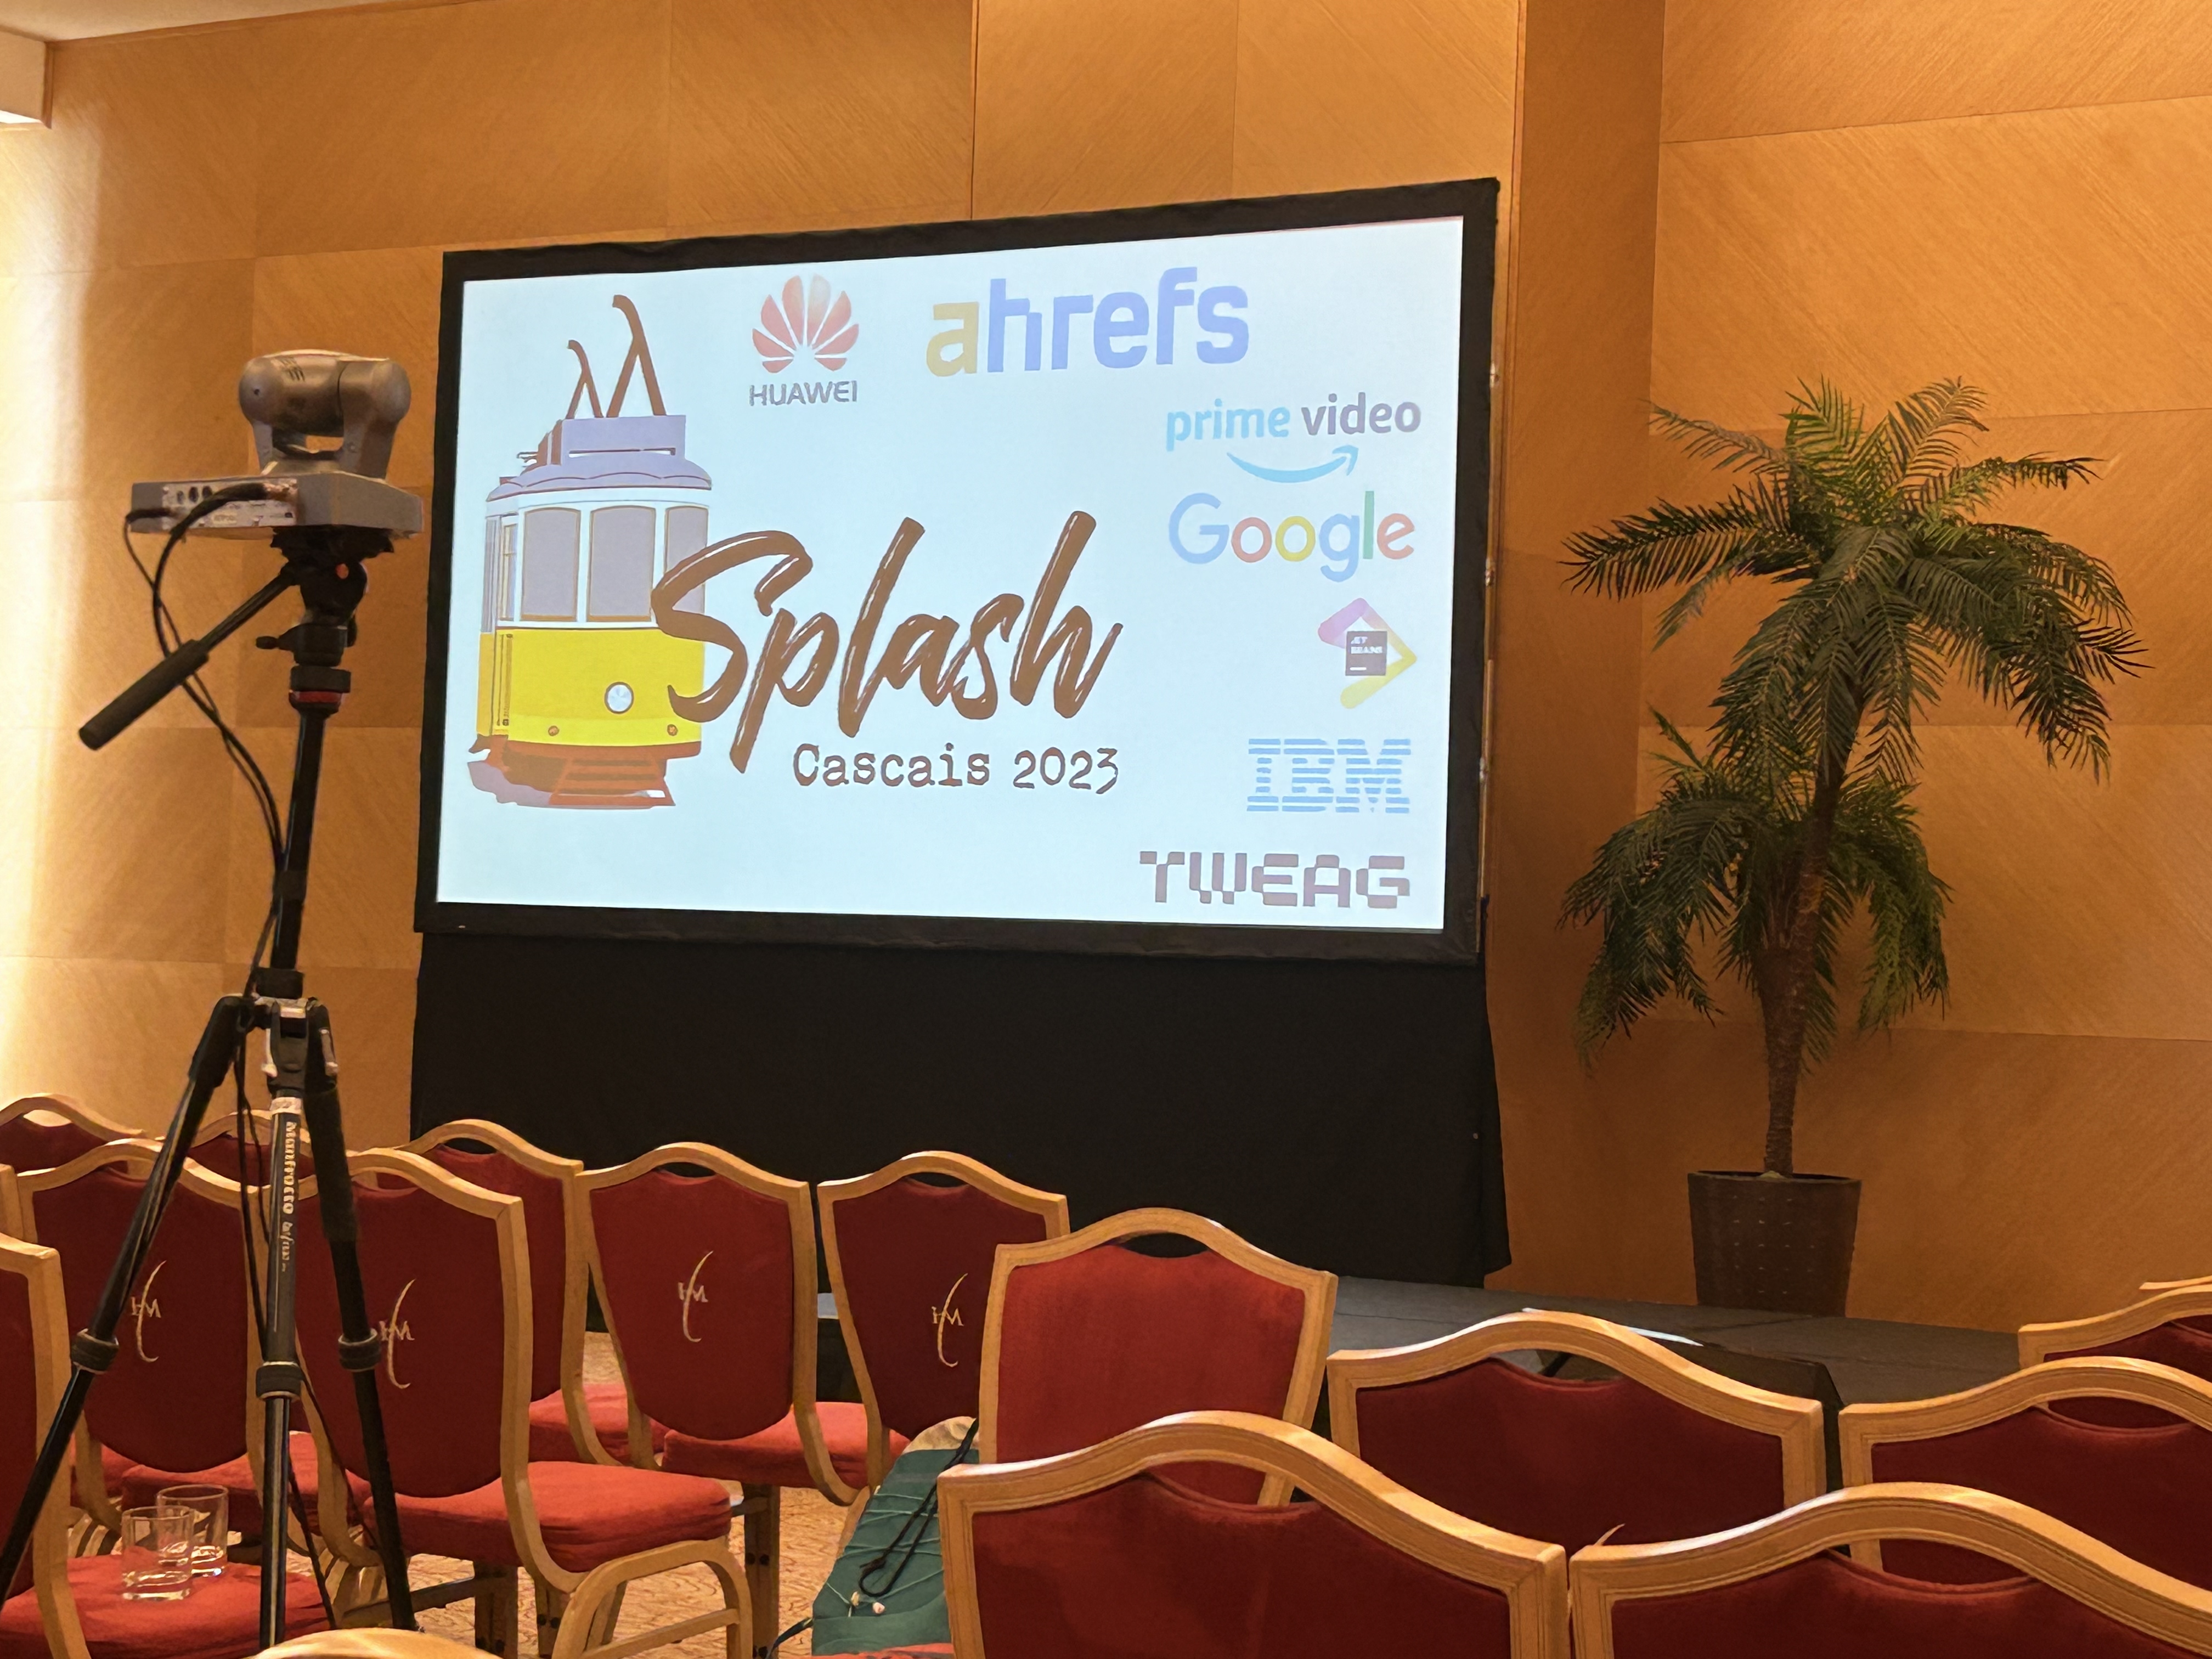 Conference room setup for the Splash event in Cascais 2023, with a large projector screen displaying the event's title and logos of sponsors like Huawei, Ahrefs, Prime Video, Google, and IBM. Red chairs with curved backs are neatly arranged in rows, facing the screen. A camera on a tripod stands to the left, ready to record, and a potted palm tree adds a touch of greenery to the right side of the room.